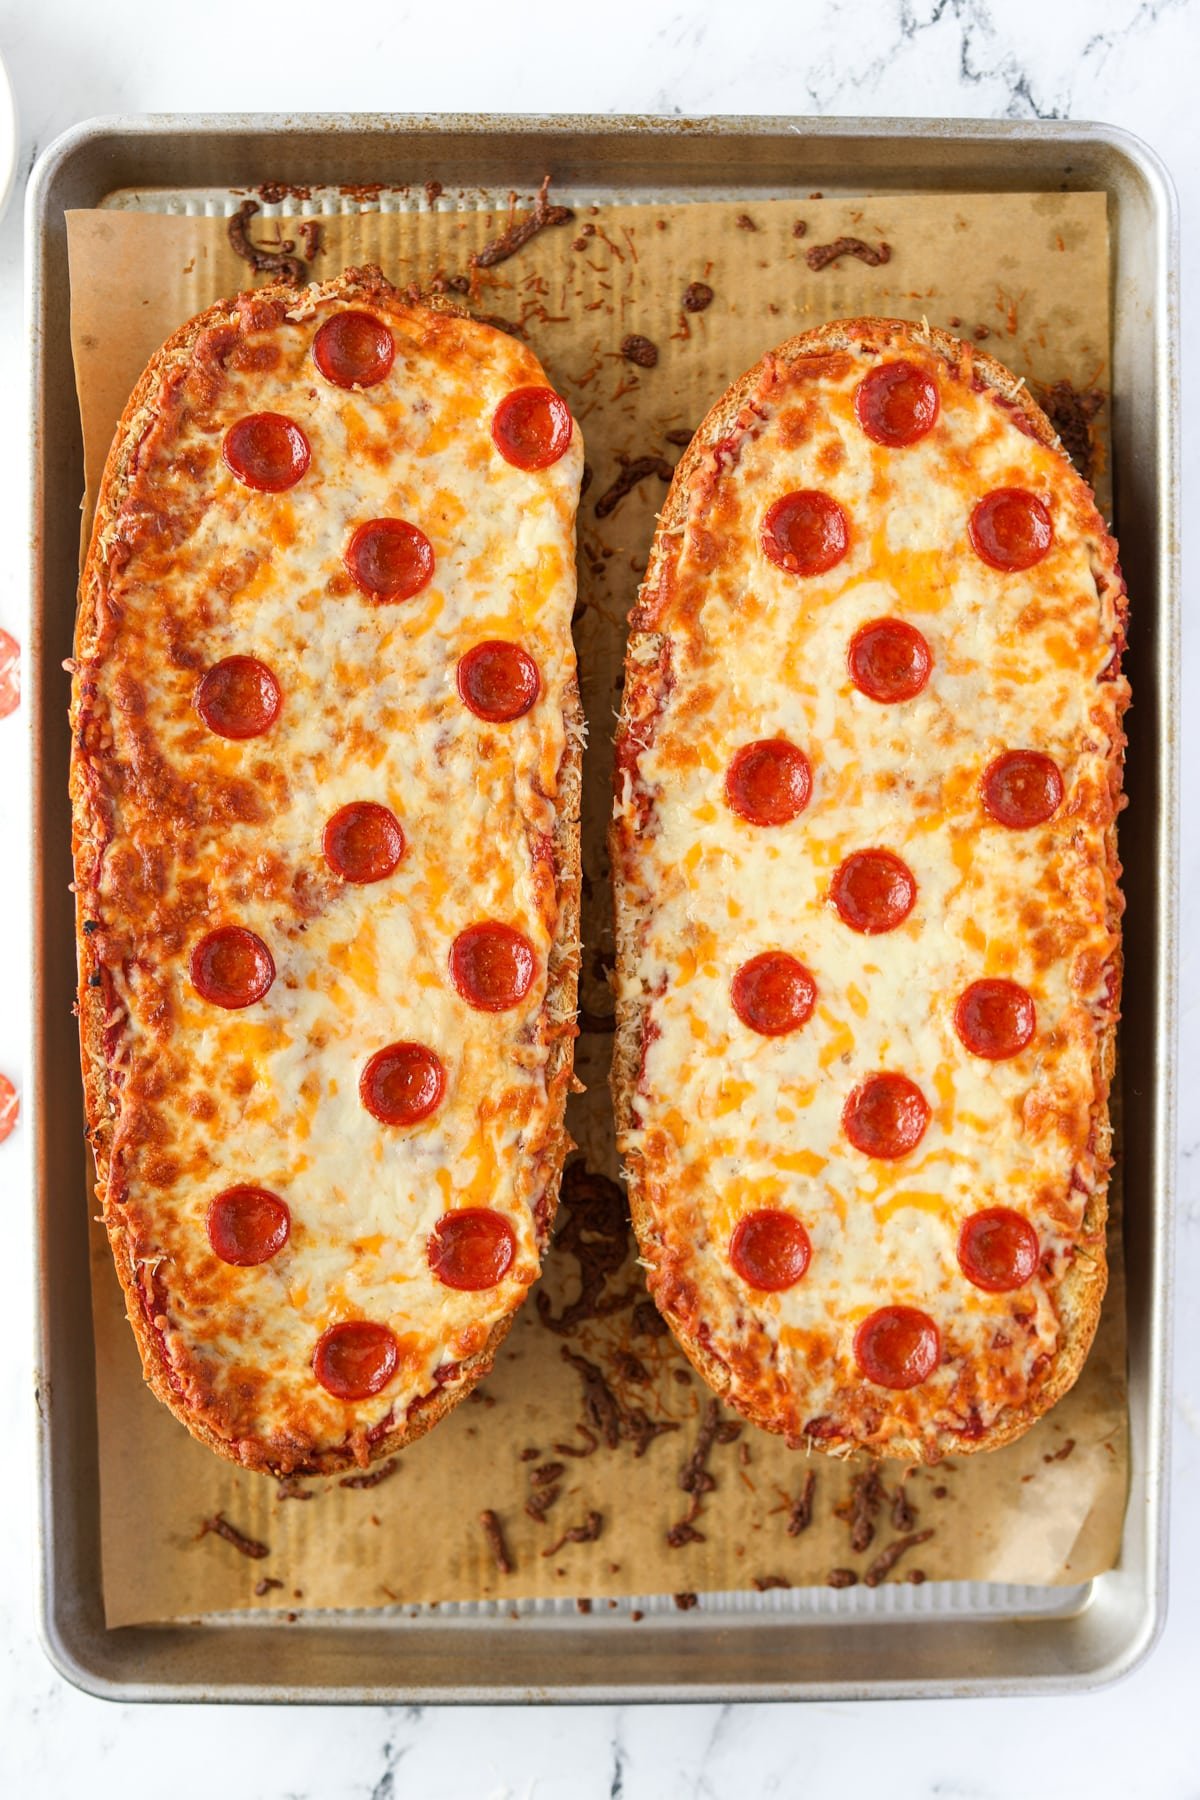 Two halves of French Bread pizza on a baking sheet.